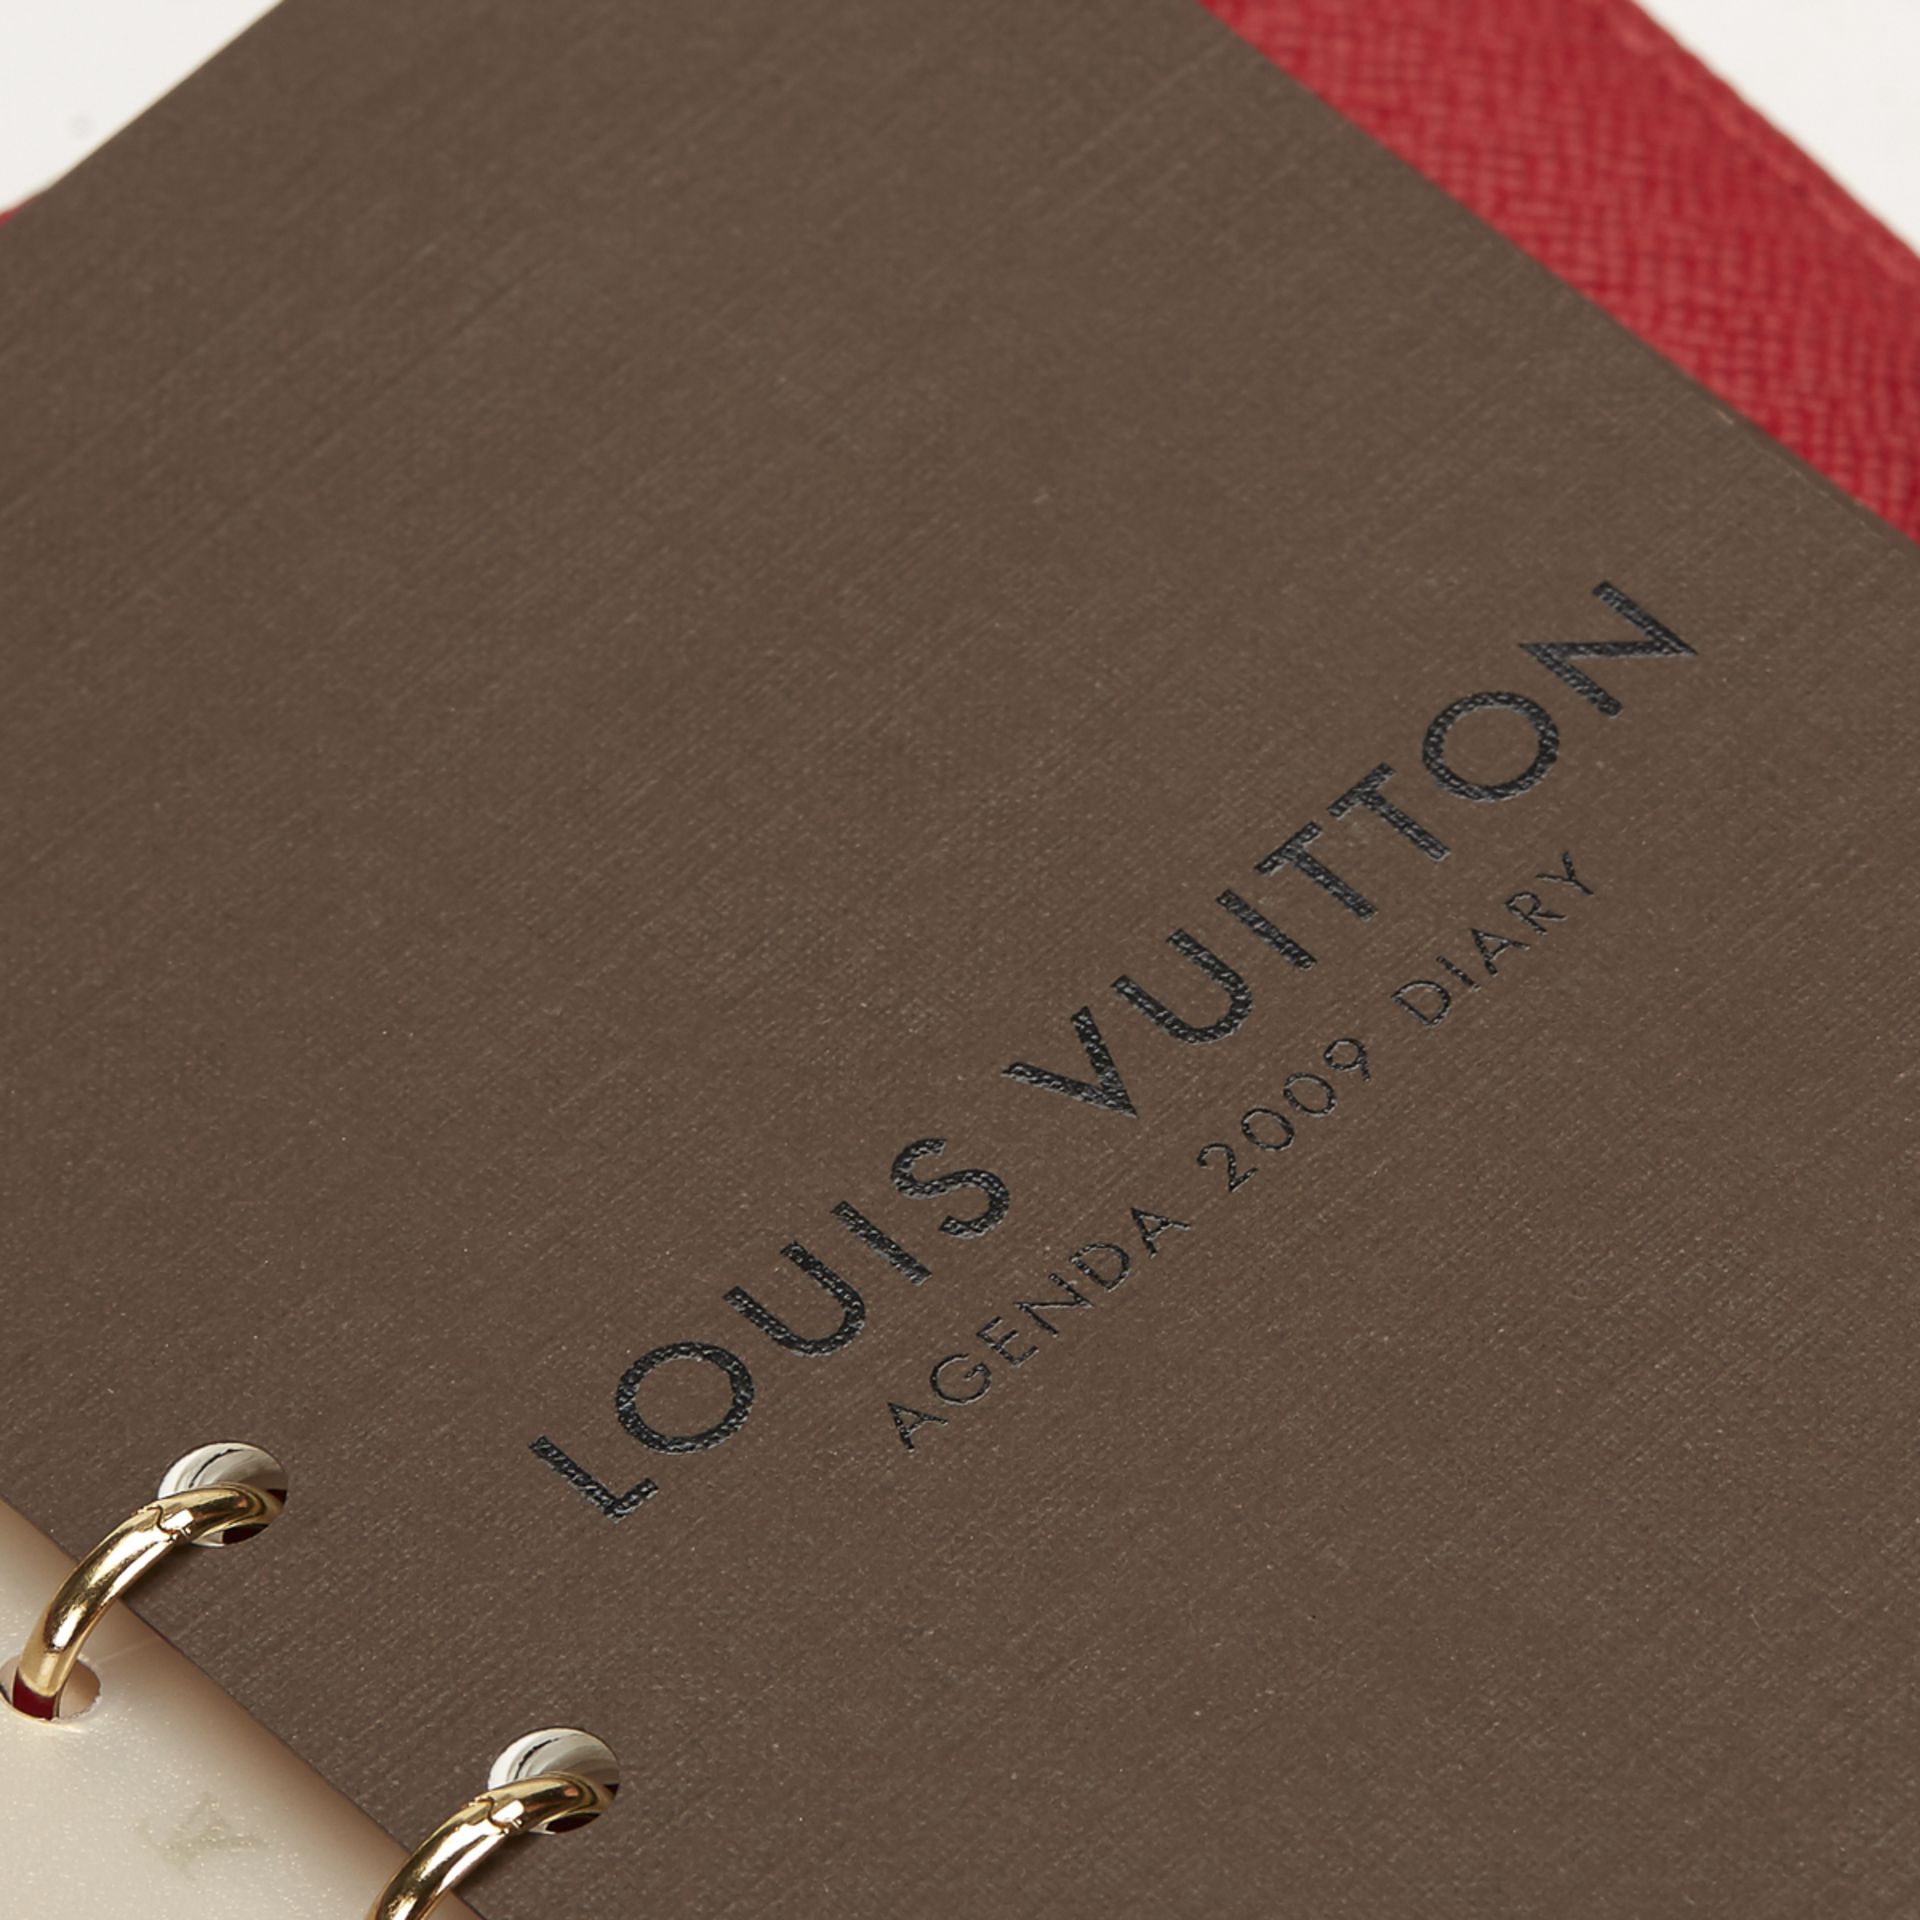 LOUIS VUITTON, Small Ring Agenda - Image 8 of 11